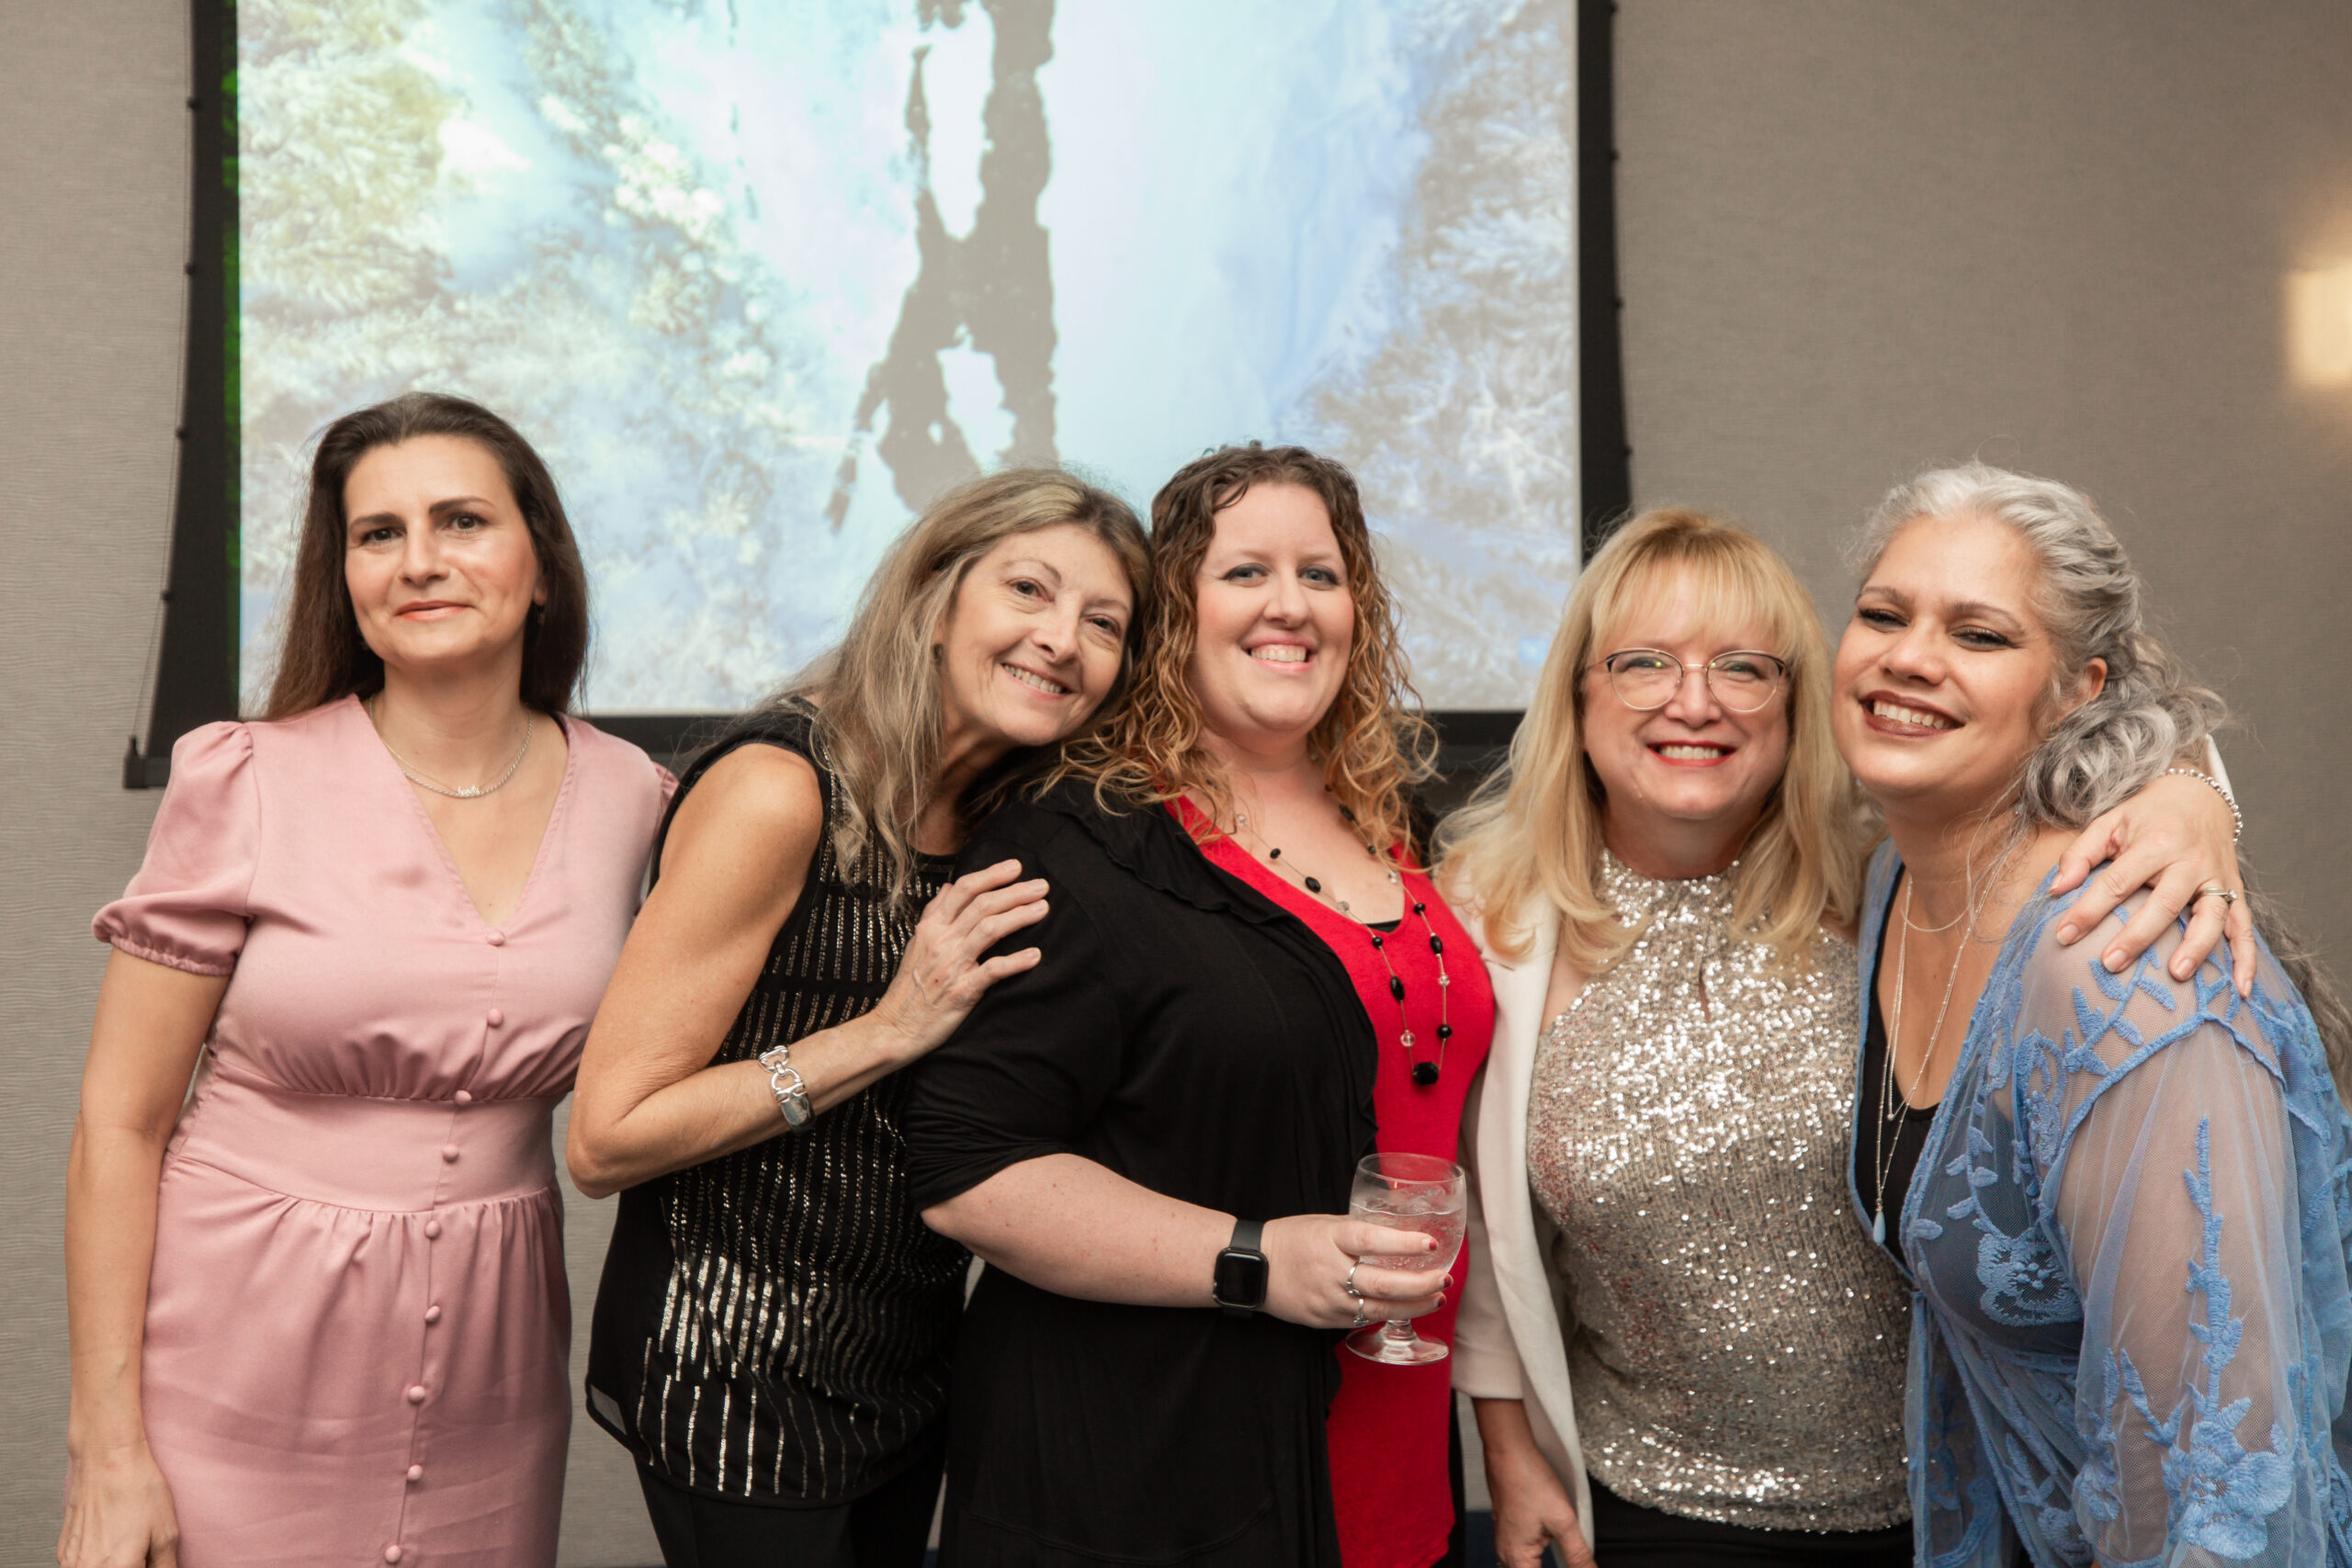 Ladies night out! From left to right, Realtor Rita Hegedus, Accountant Lynne Jessup, Property Manager Jen Assip, Accountant Lisa Bradford, and Property Manager and Realtor Lisa Melendez.